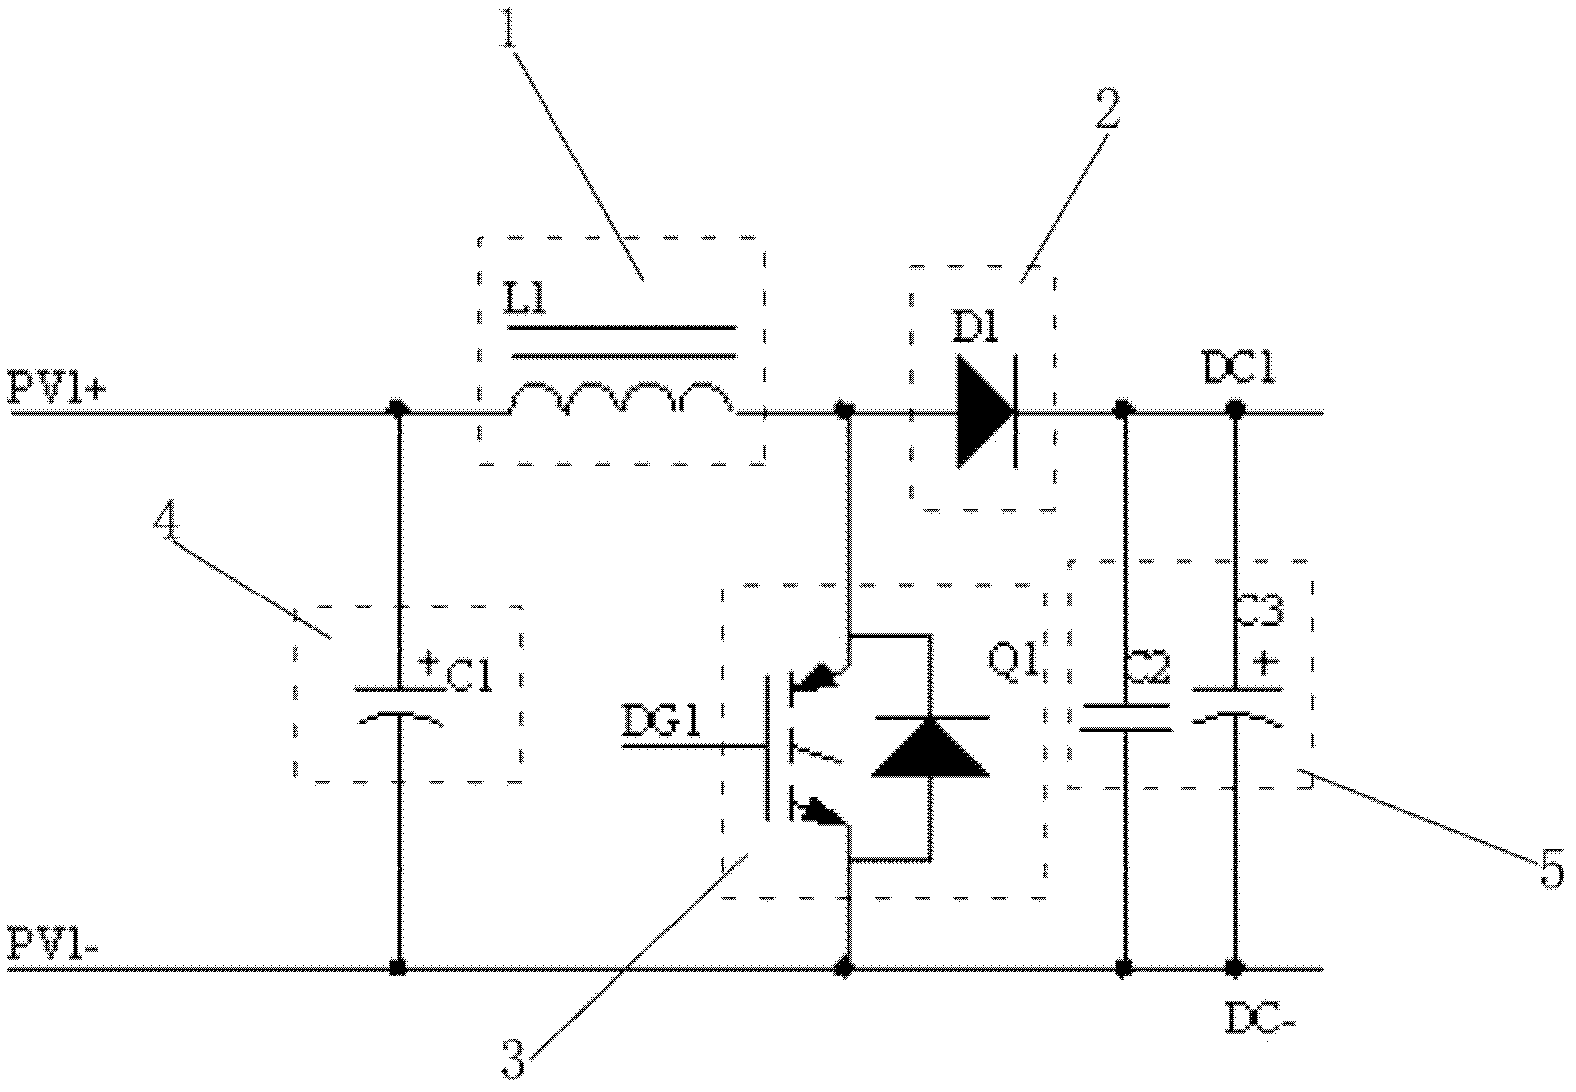 Multi-path MPPT (maximum power point tracking) circuit and solar photovoltaic inverter